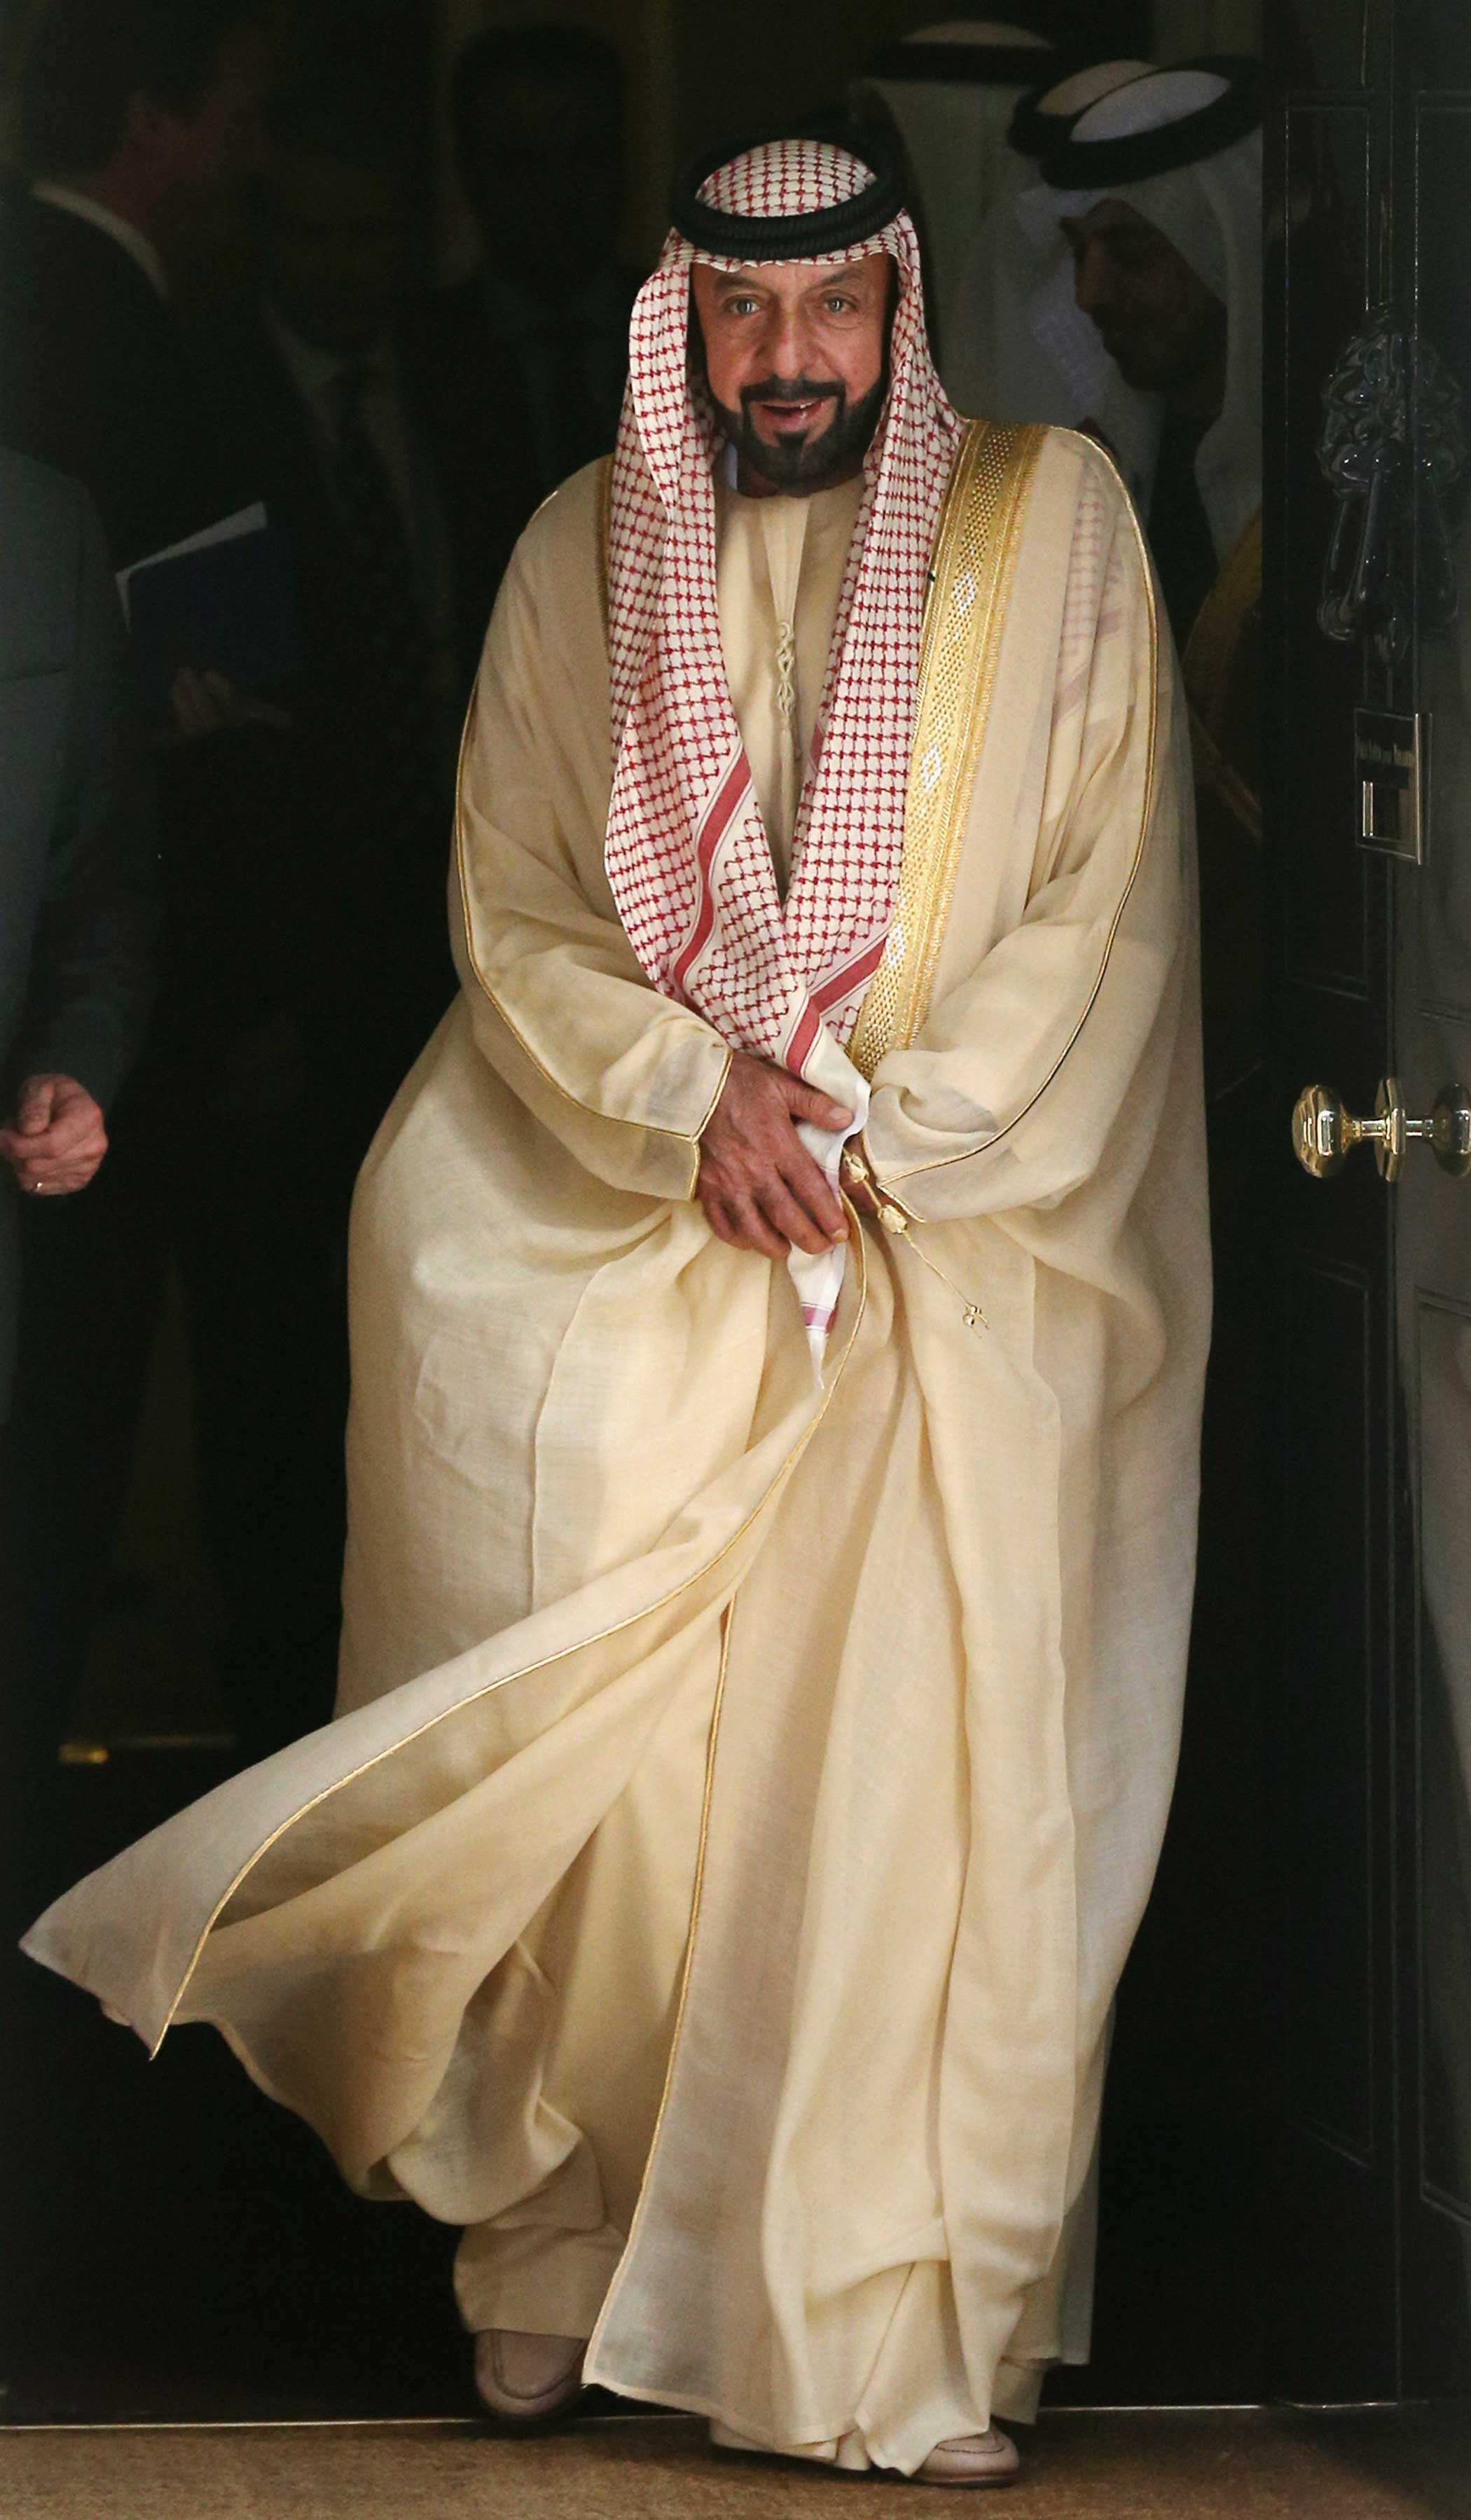 President of the United Arab Emirates, His Highness Sheikh Khalifa bin Zayed Al Nahyan, leaves 10 Downing Street after meeting with British Prime Minister David Cameron on May 1, 2013 in London.